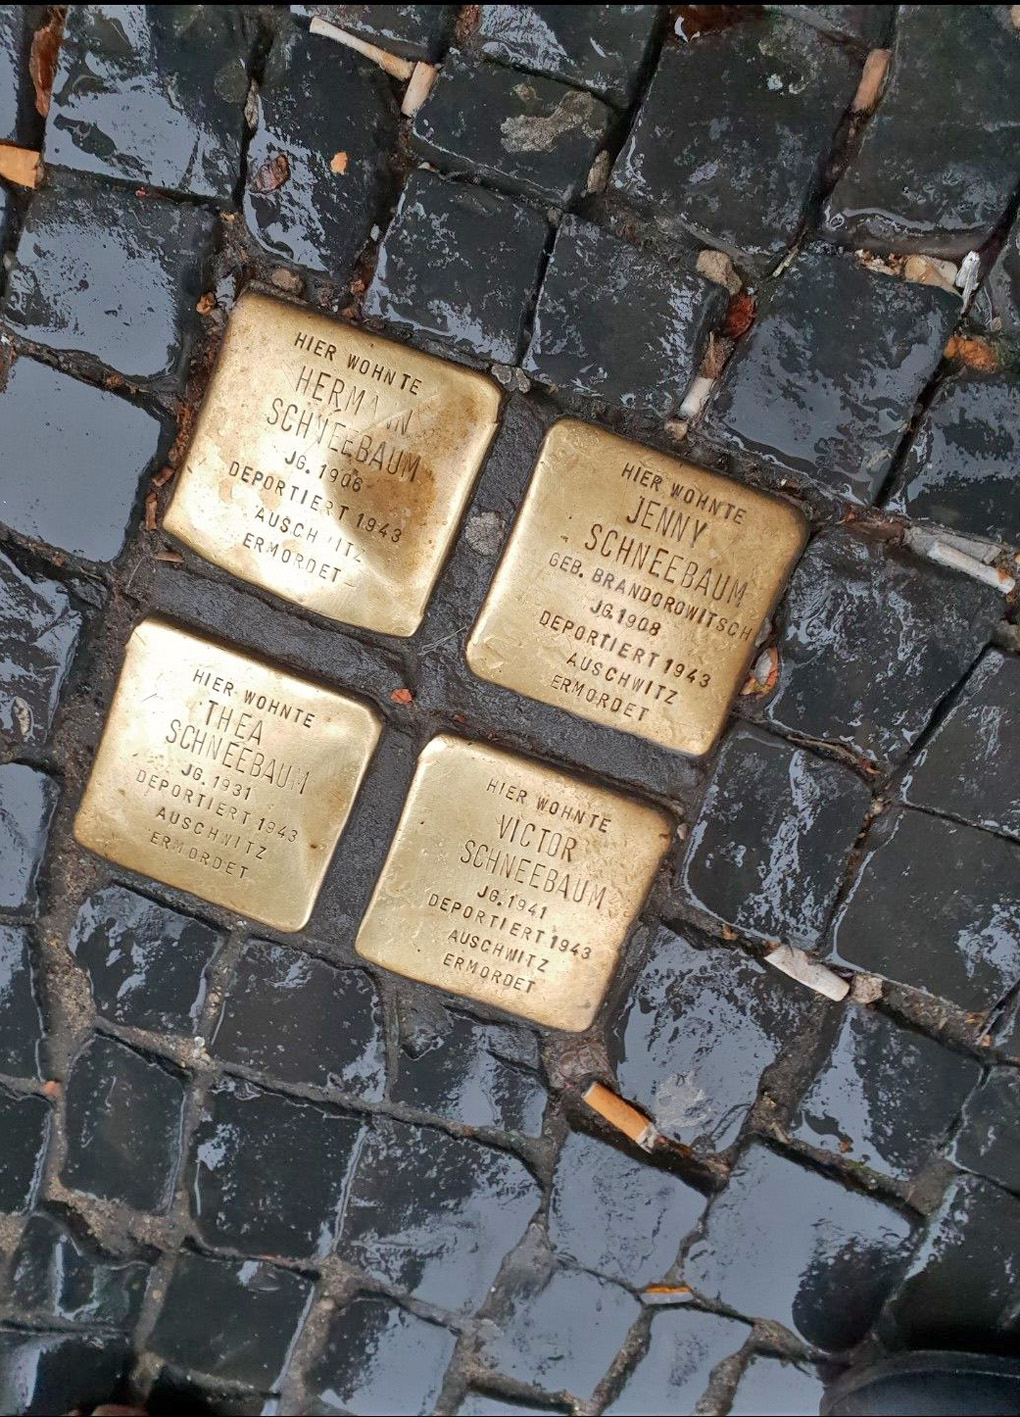 Commemorative brass plaques set outside the addresses where victims lived